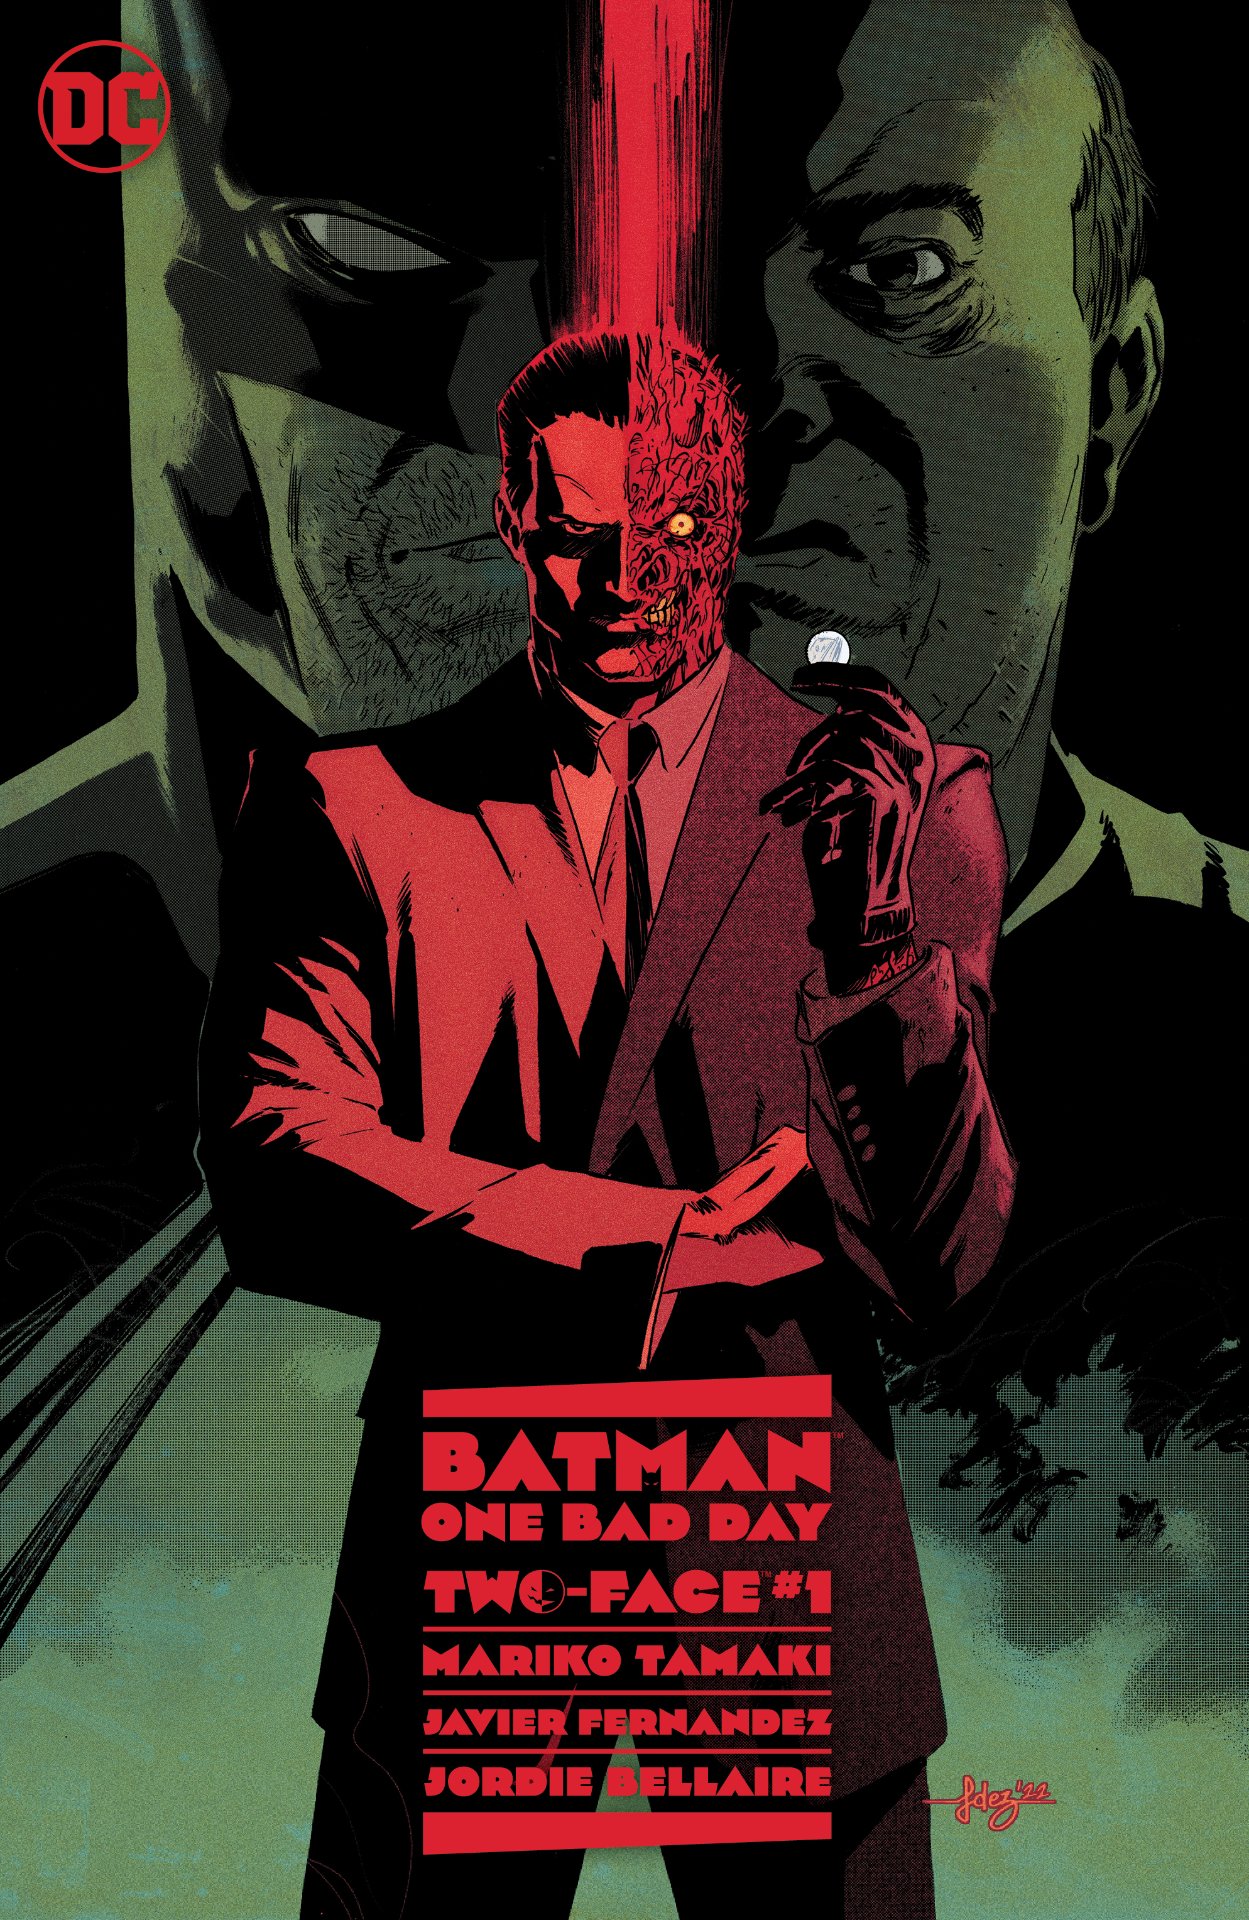 Batman - One Bad Day: Two-Face Nr. 1-Cover